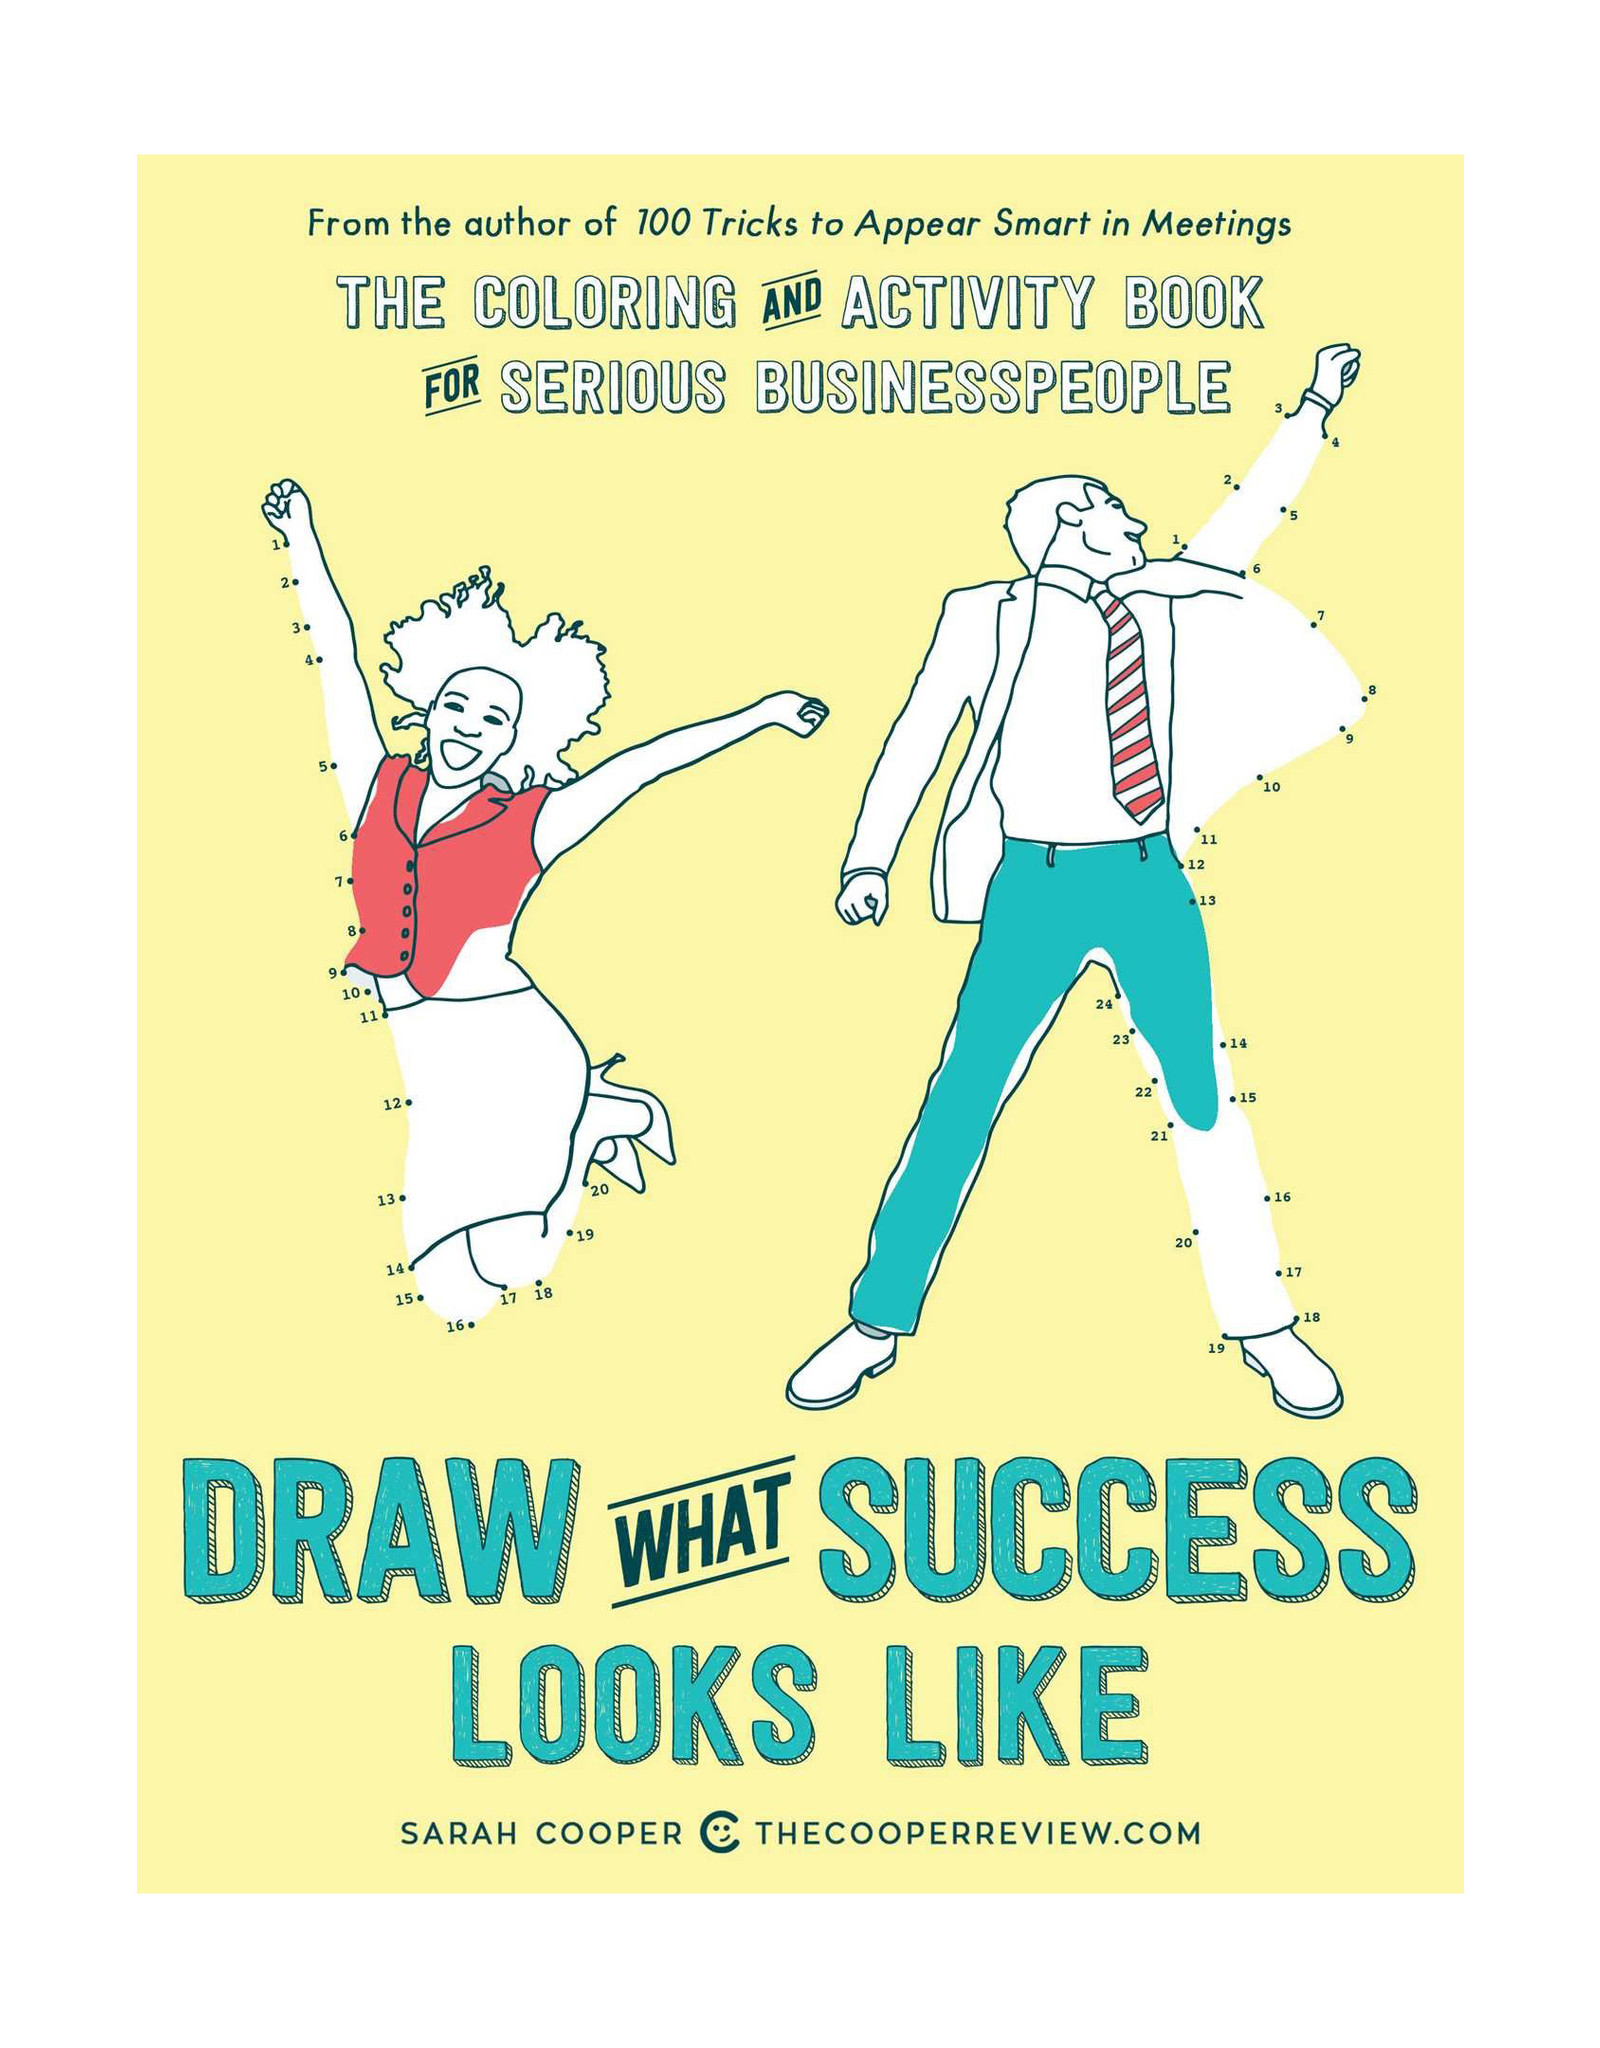 Draw What Success Looks Like*